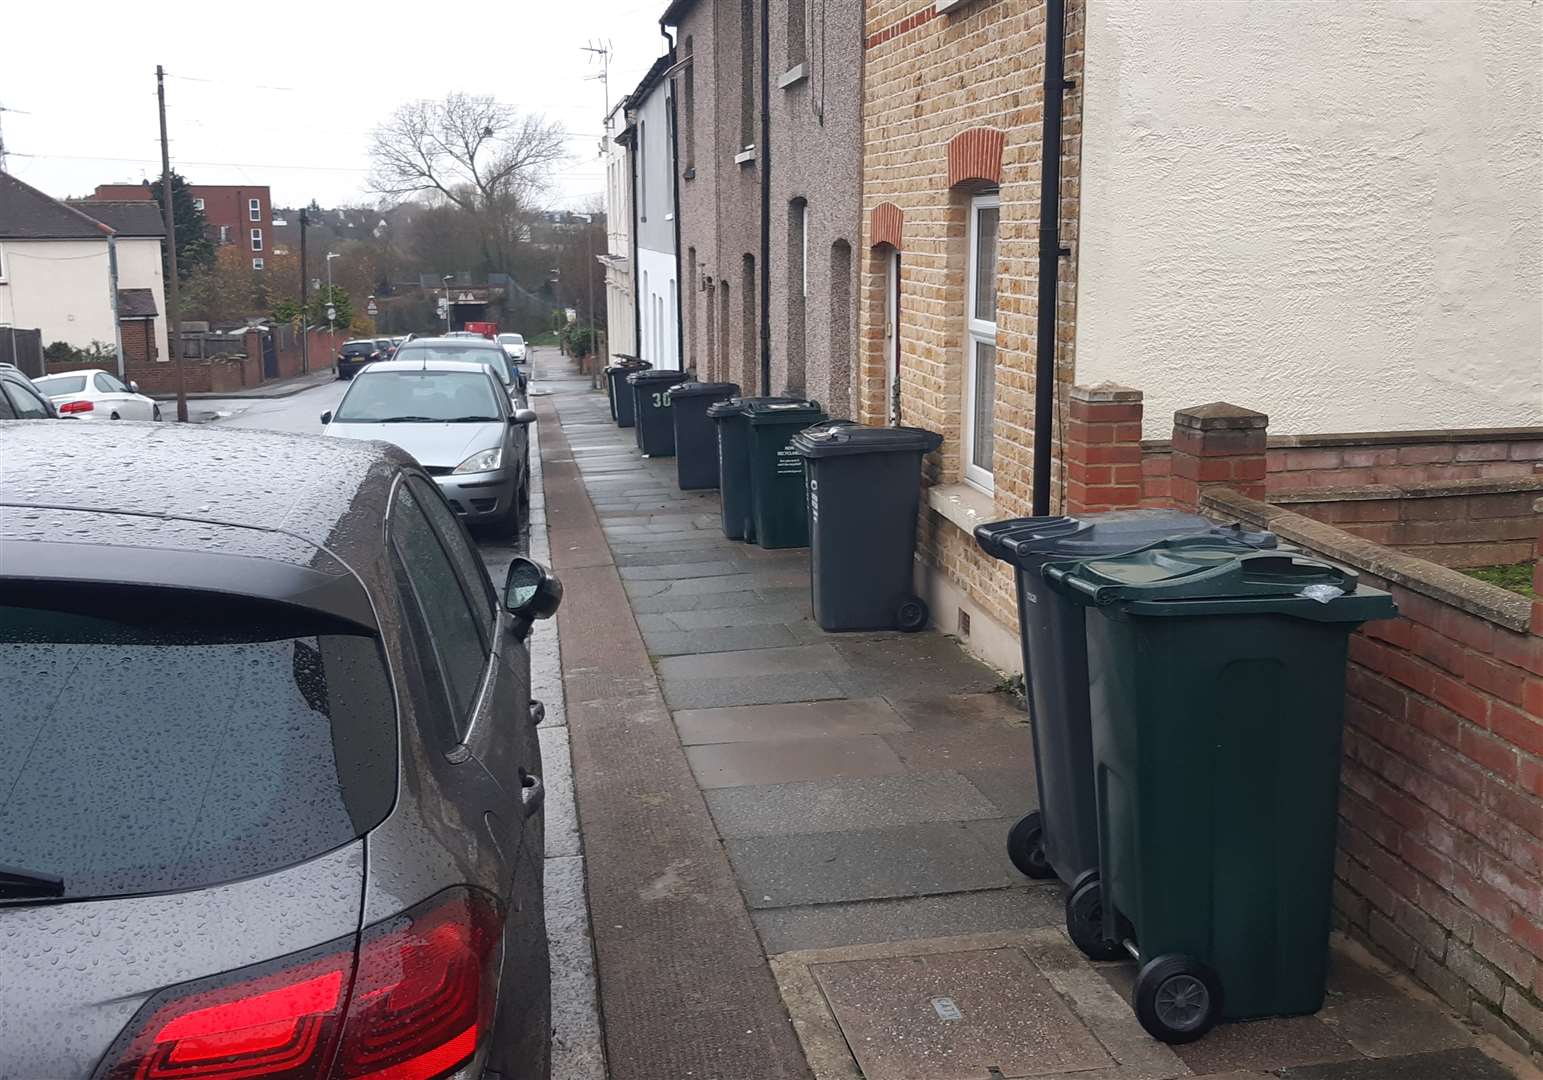 Dartford Council has announced changes to bin collections this Christmas